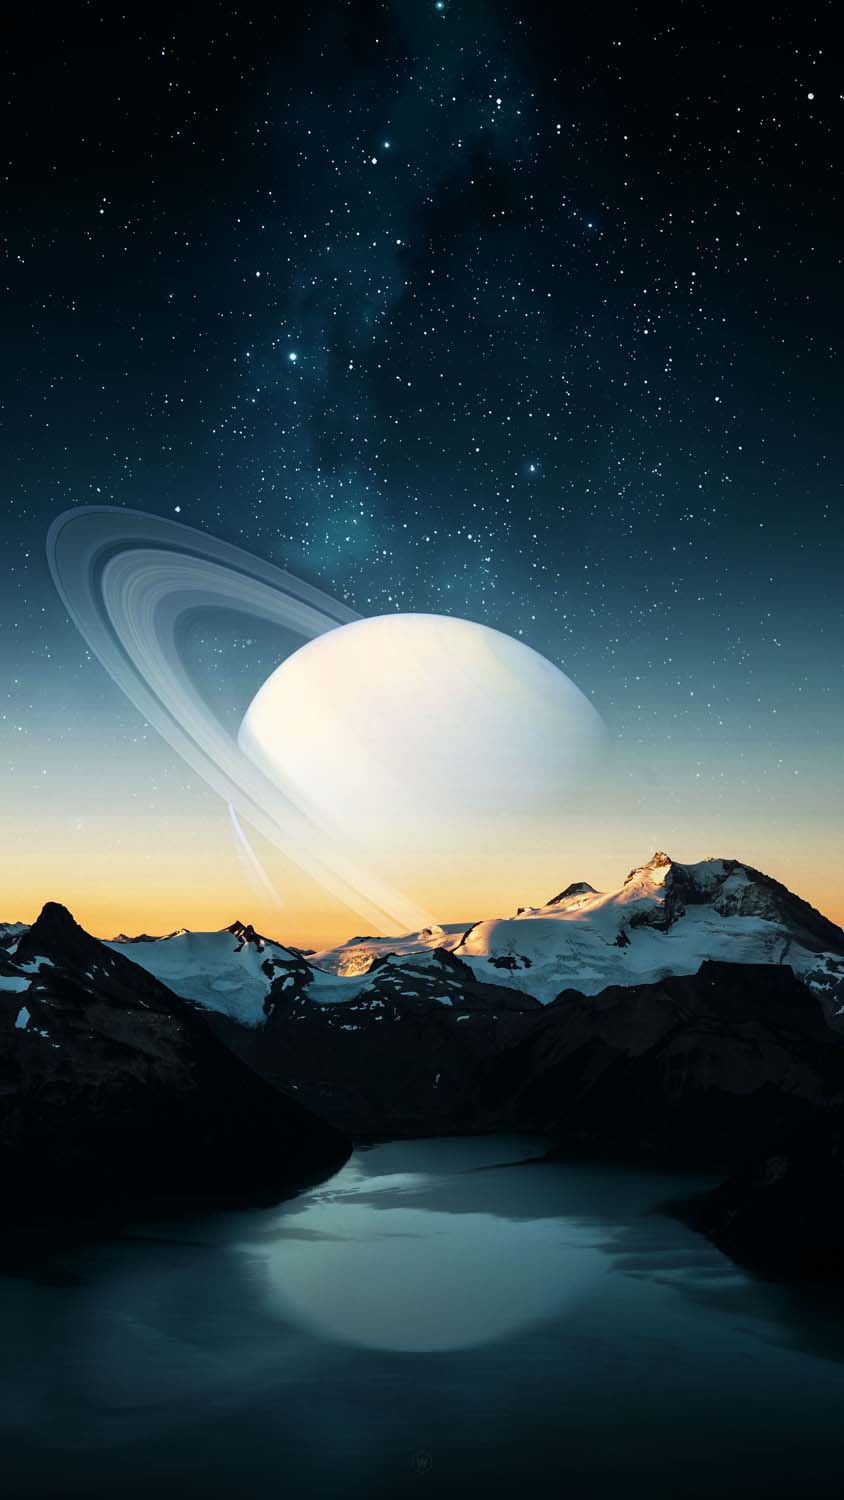 Saturn View from Mountains iPhone Wallpaper HD